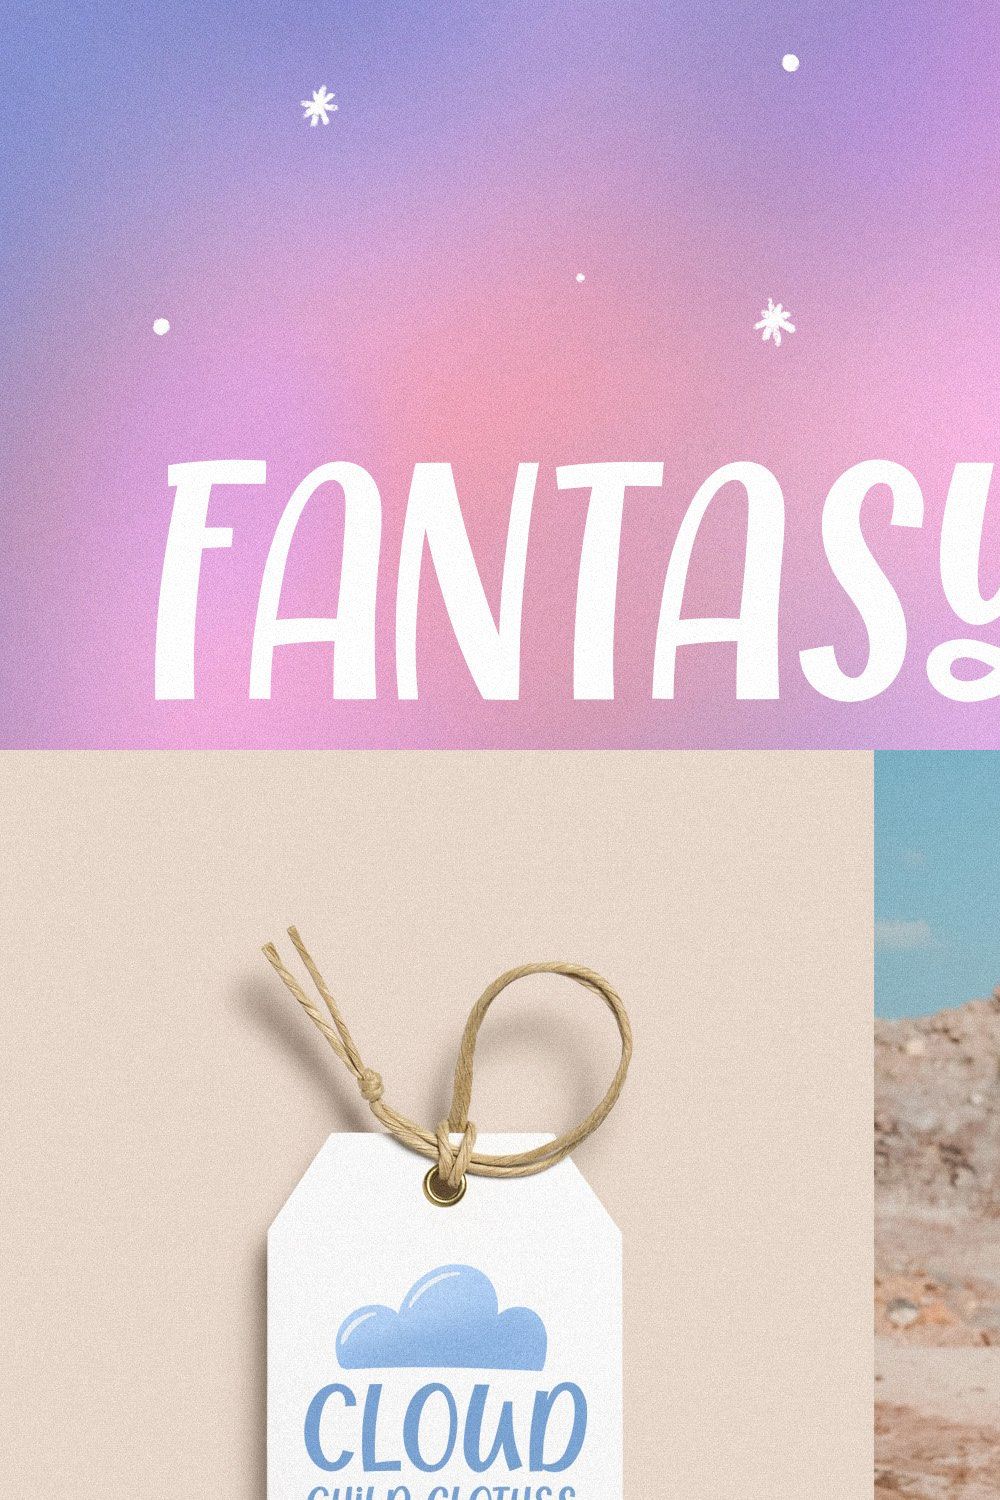 Fantasyland - quirky font pinterest preview image.